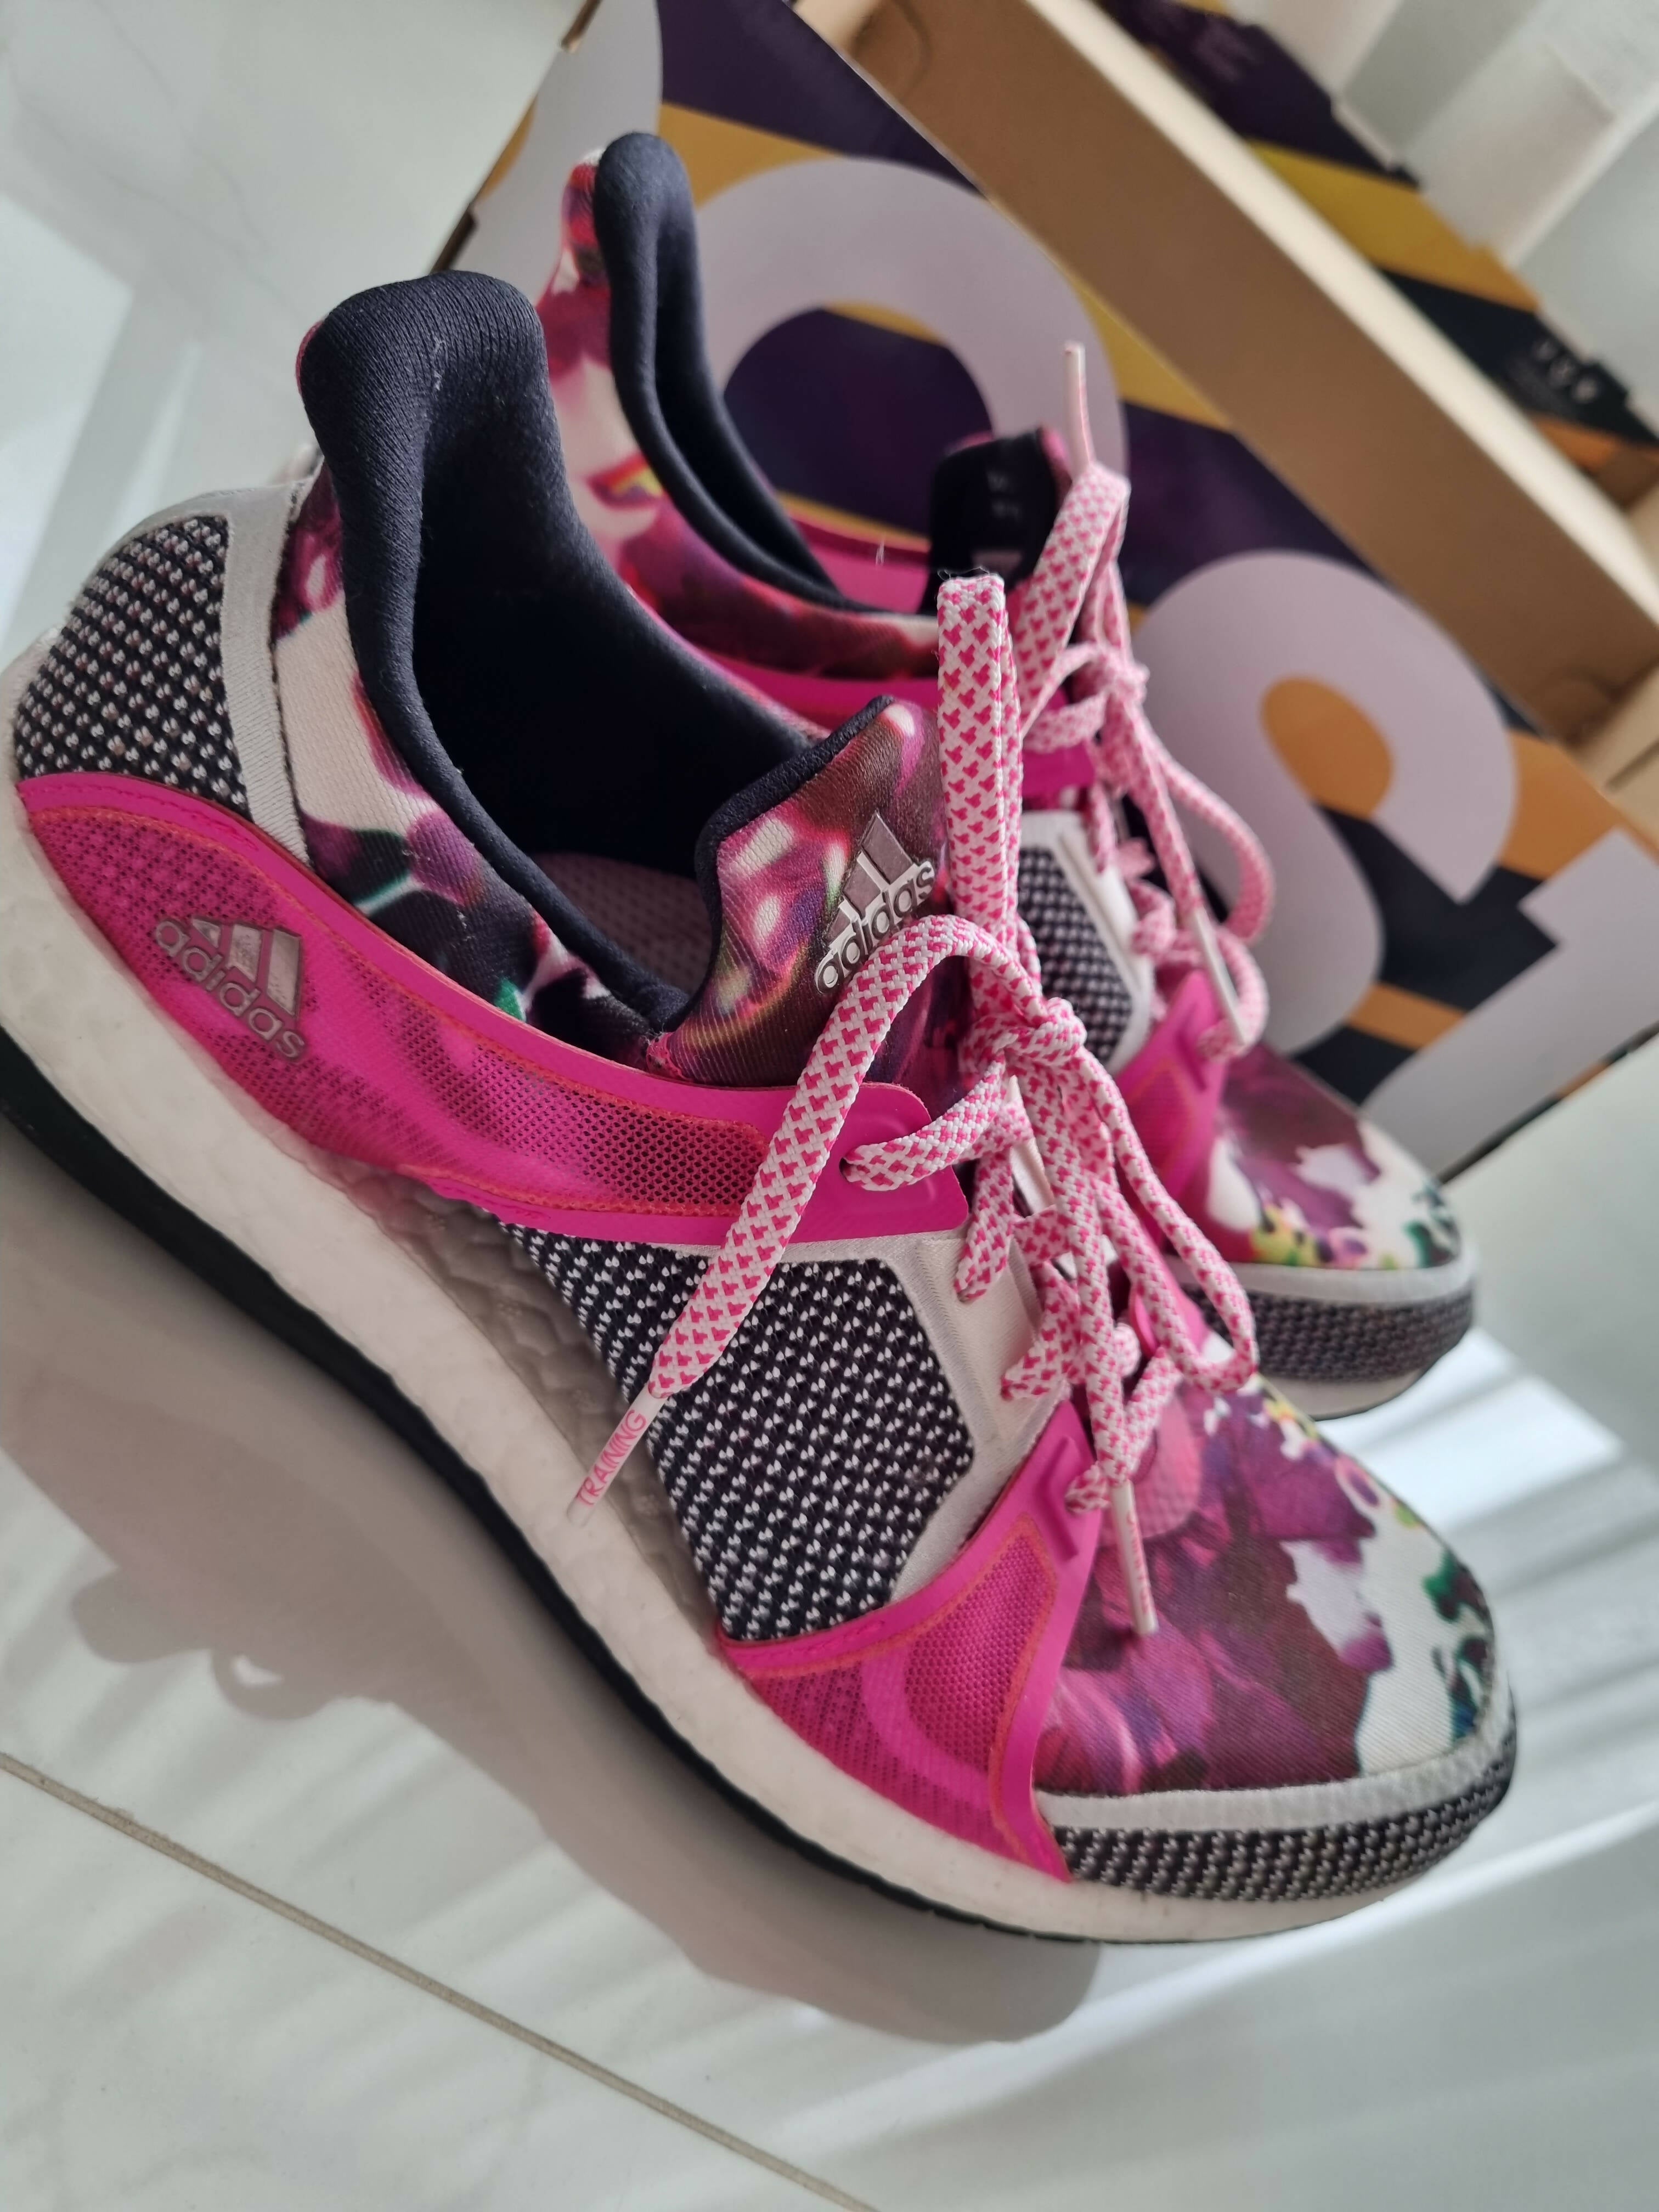 Adidas | Pure Boost Women Shoes | Size 7.5| Brand New